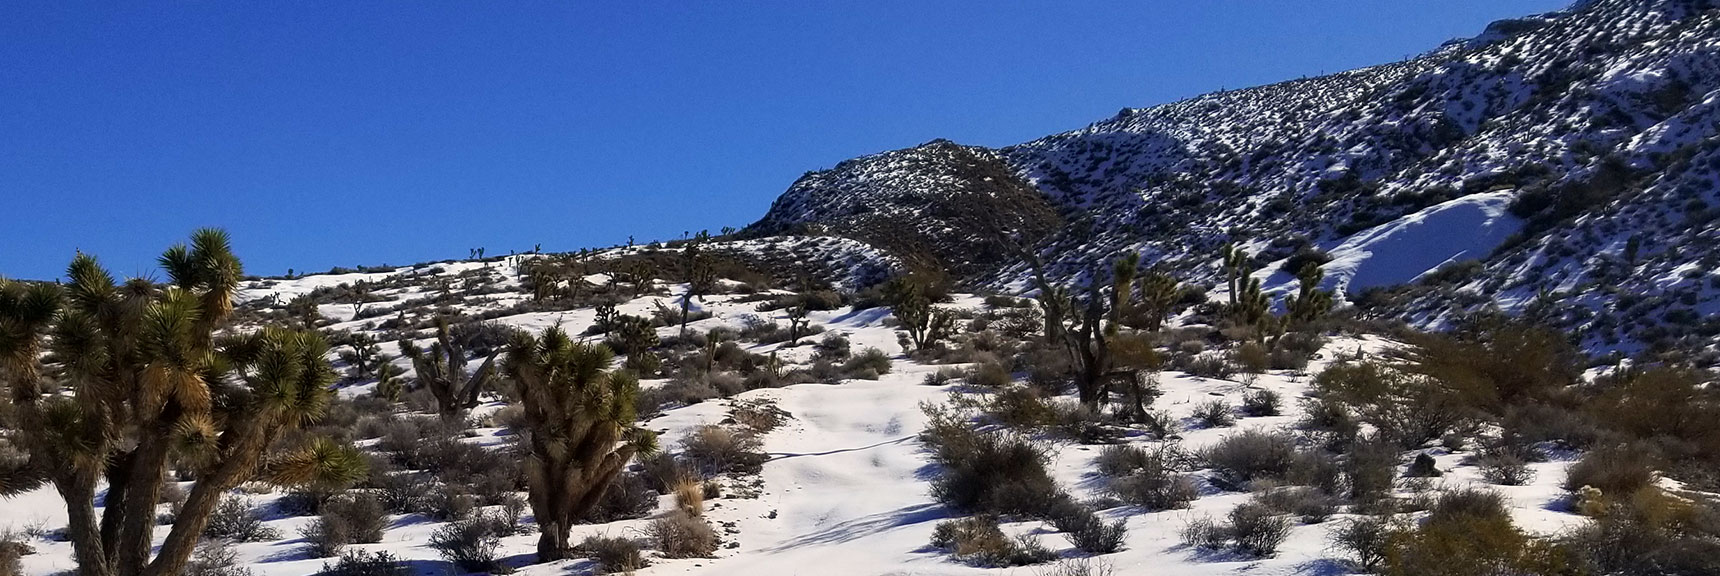 North Side of Gass Peak After Snowfall, Nevada